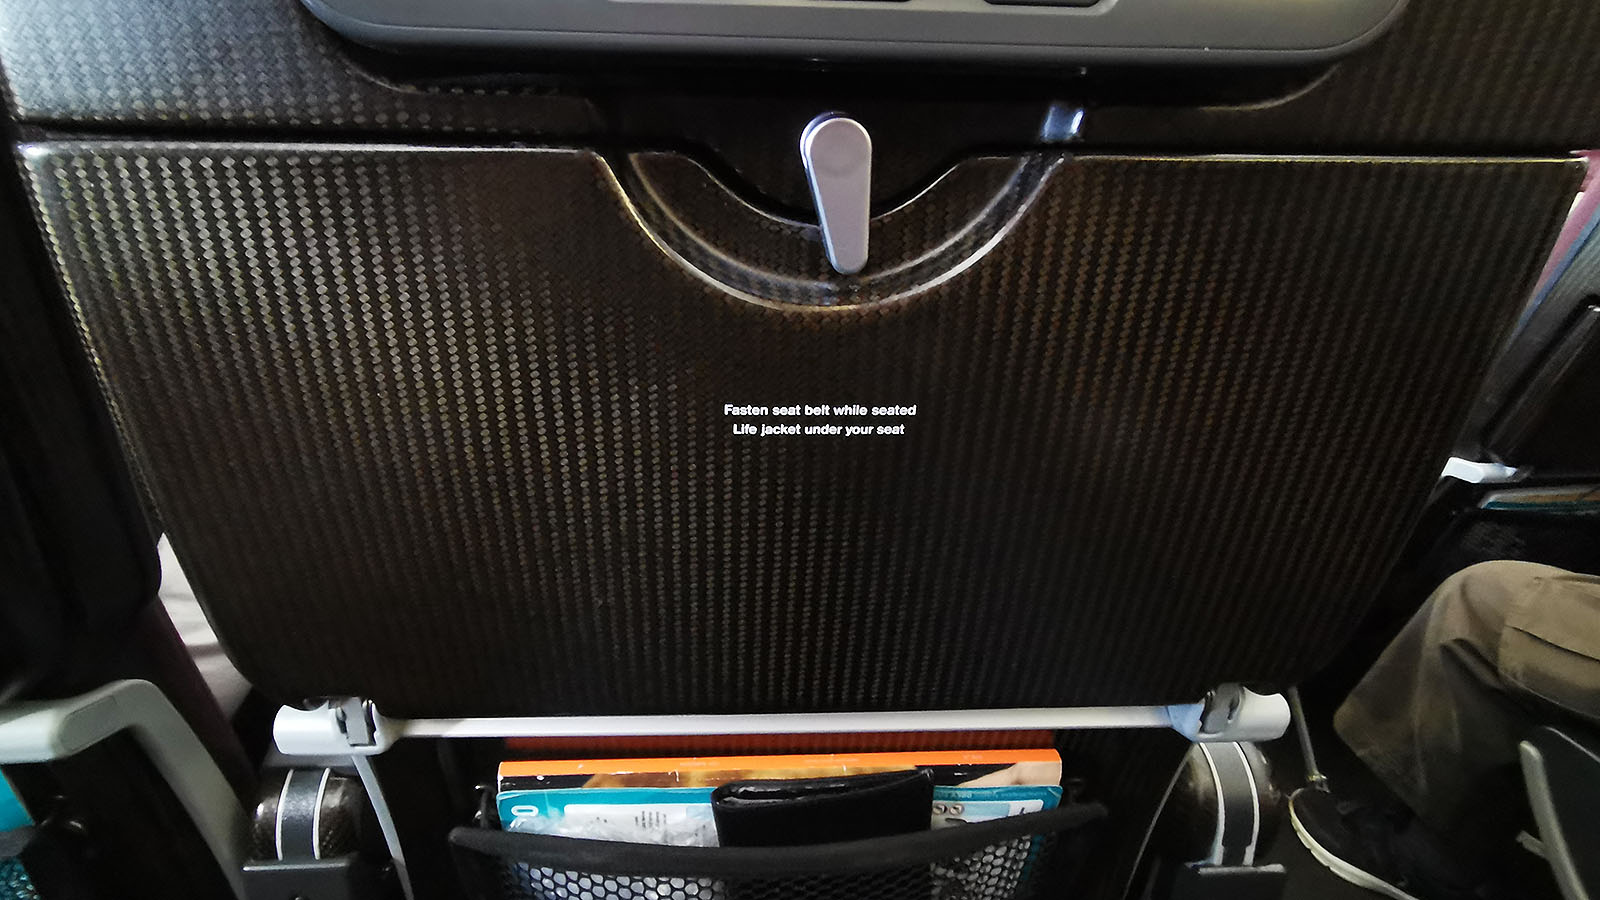 Tray table in Qantas Airbus A380 Economy